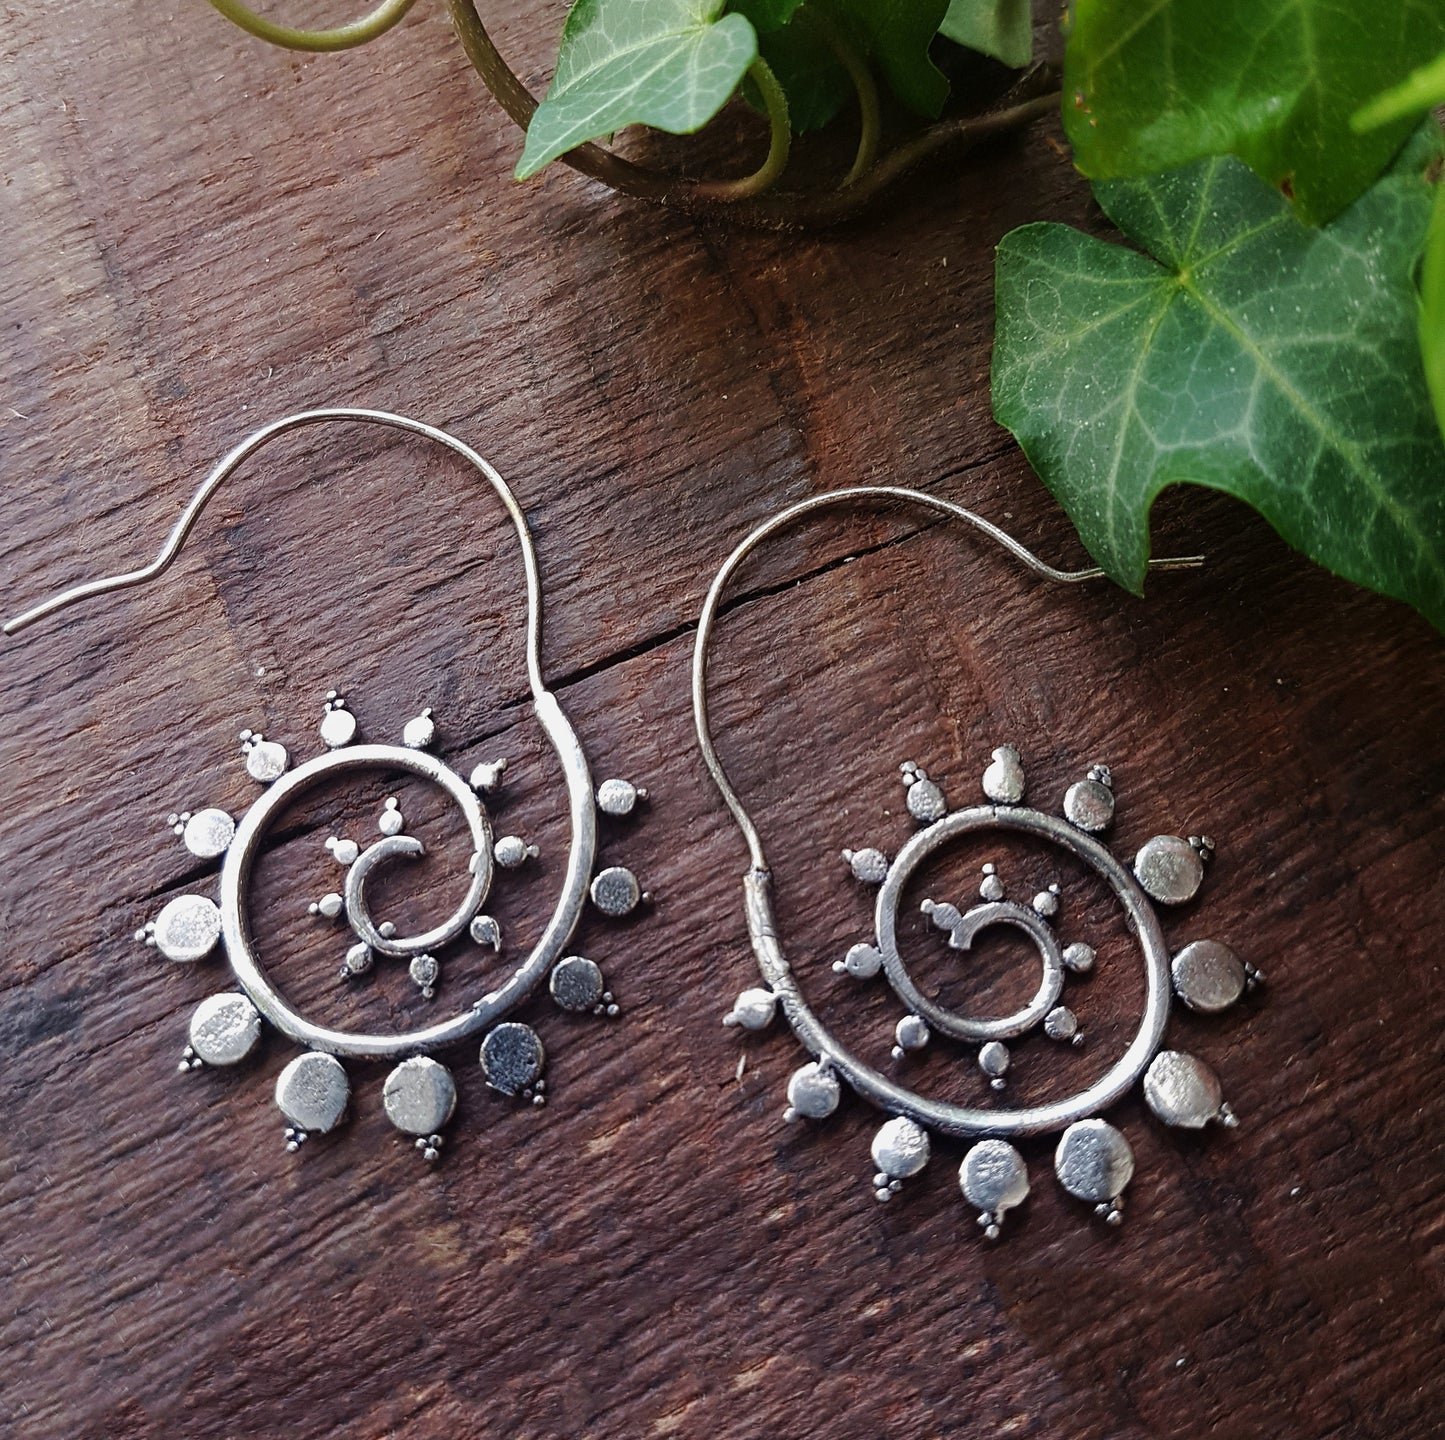 Silver threader earrings in open hoop spiral design. Delicate paisley leaf style. Sophisticated boho look. Silver plated finish. Light wt. - Vintage India Ca